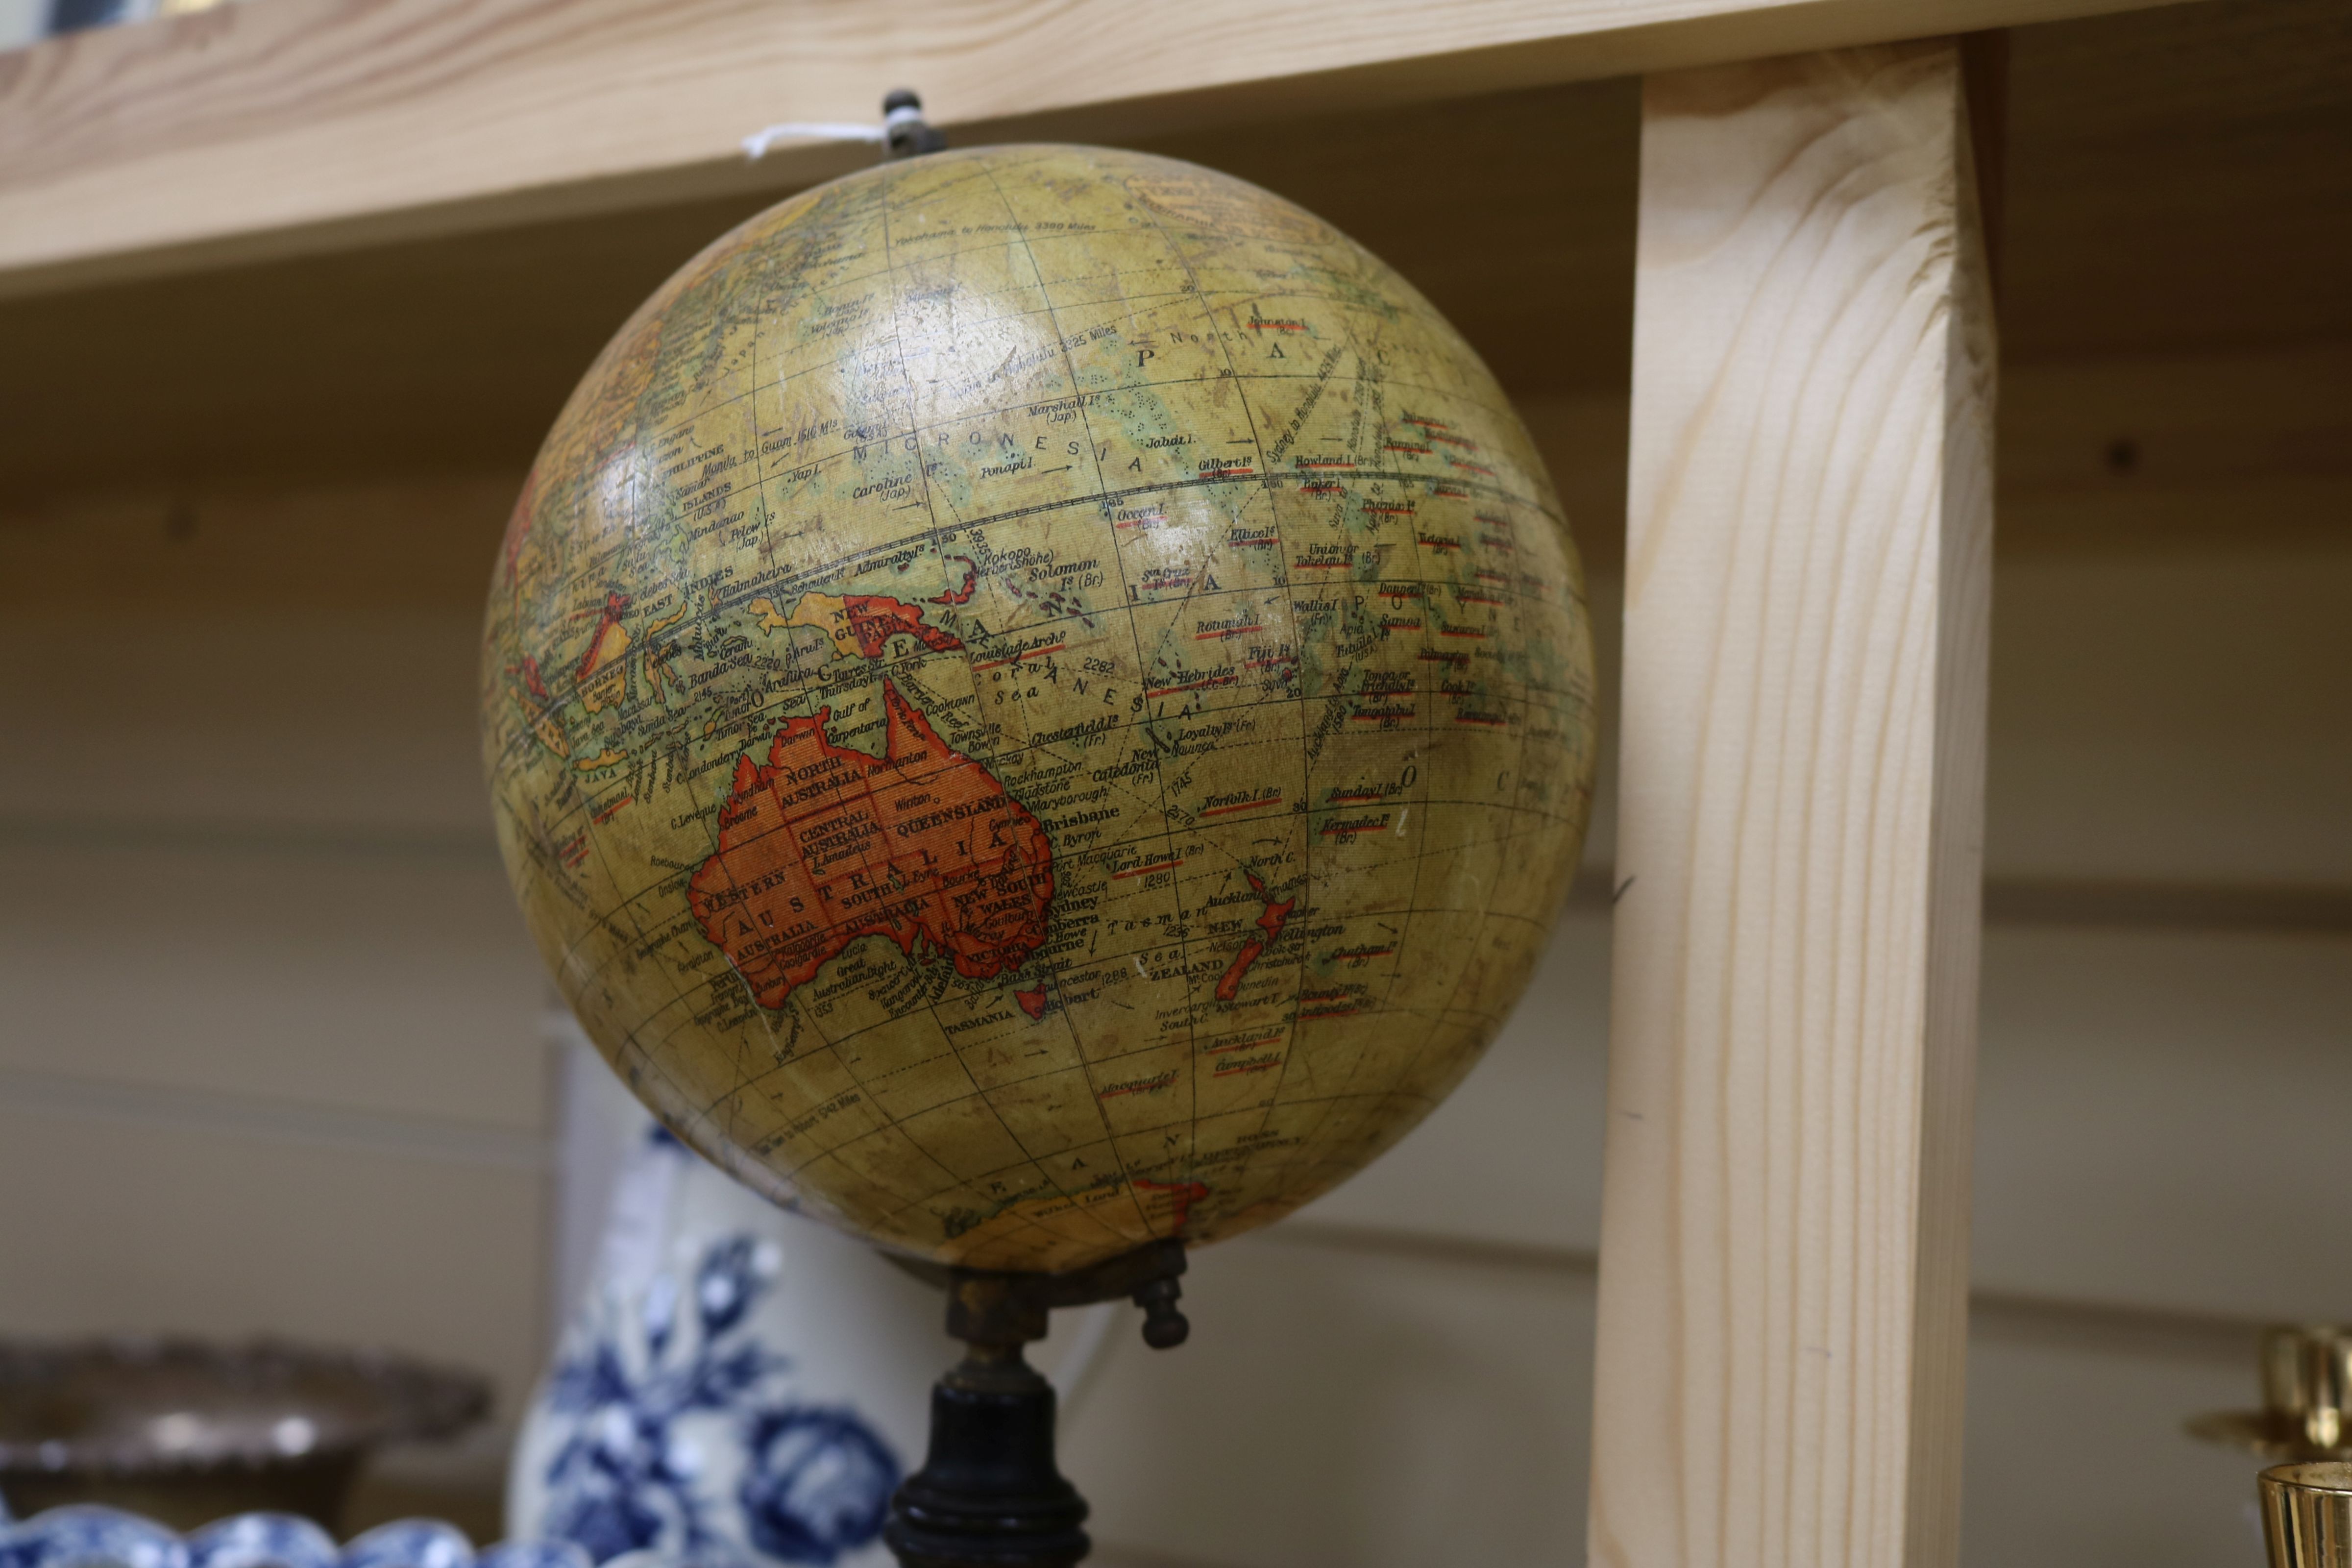 A Geographia 6 inch terrestrial globe height 32cm - Image 4 of 4